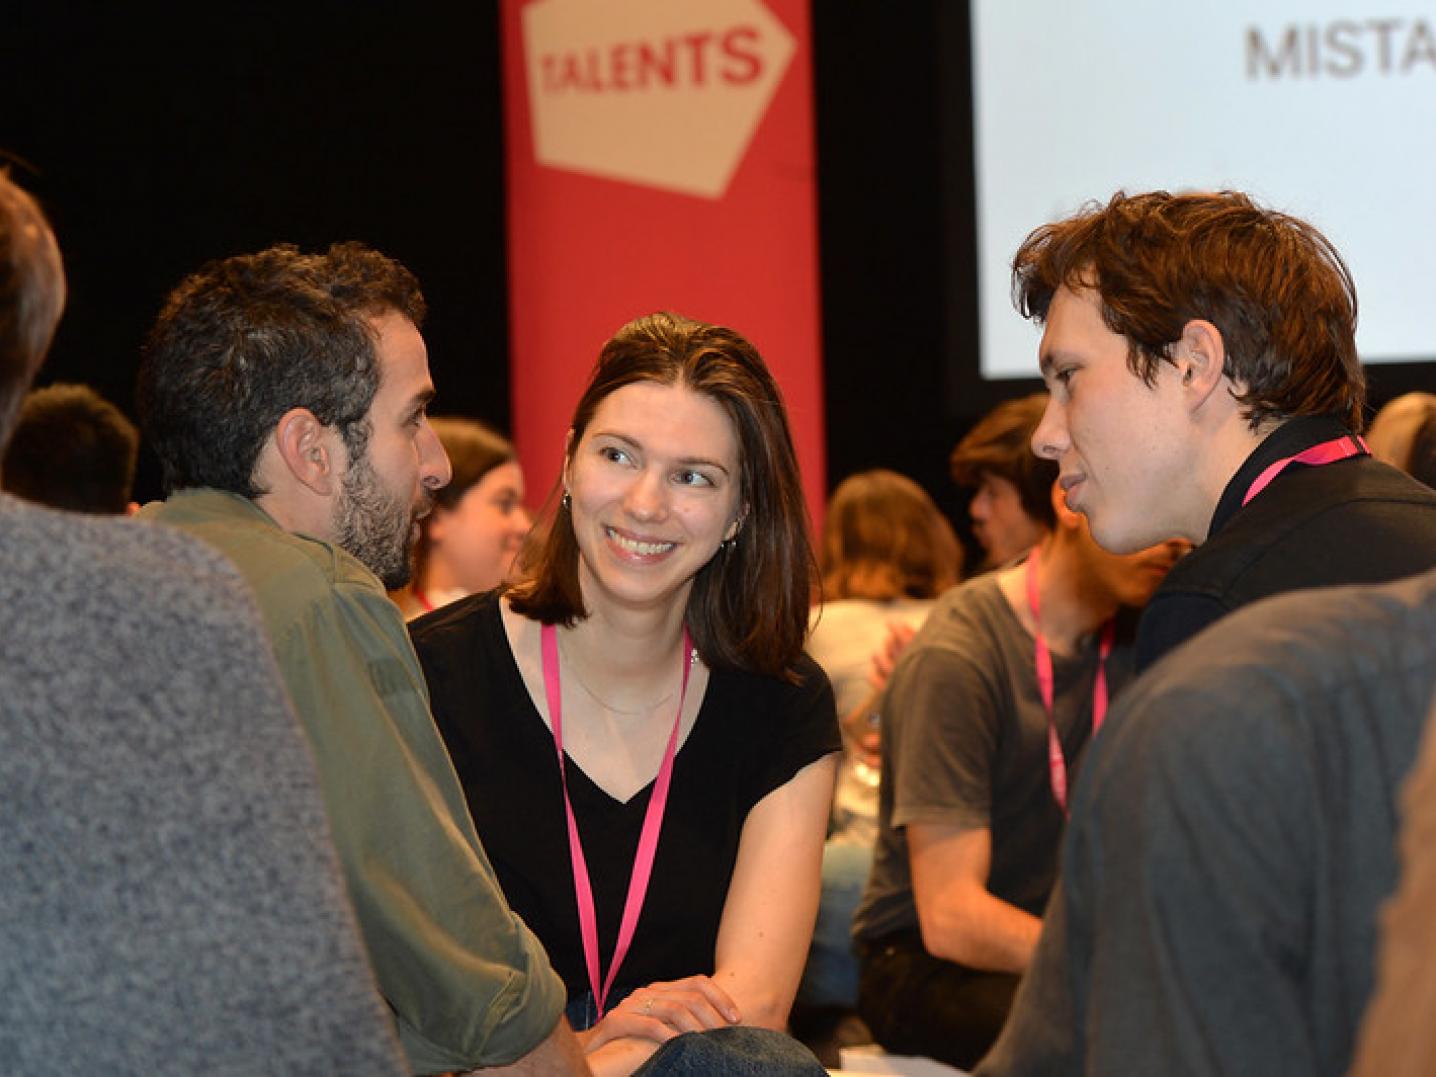 Berlinale Talents attendees shake hands at the globale speed matching event at Berlinale.